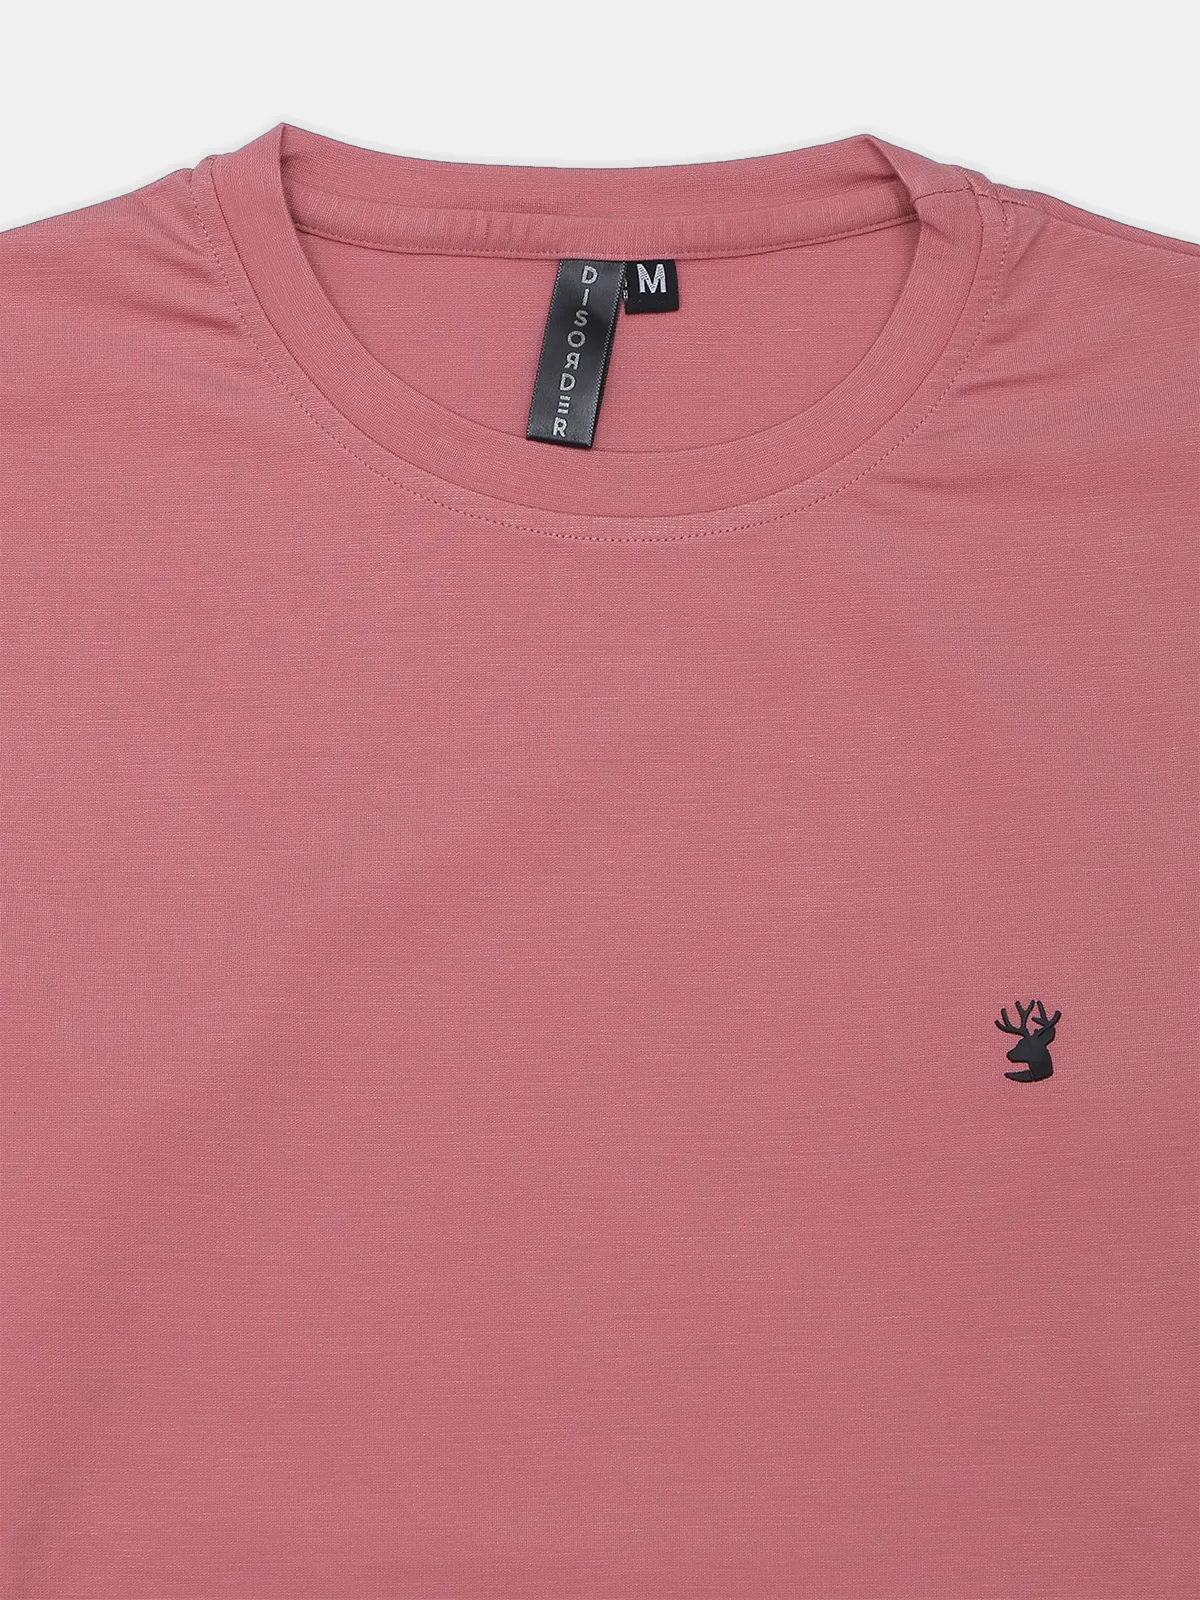 Disorder peach solid slim fit t shirt